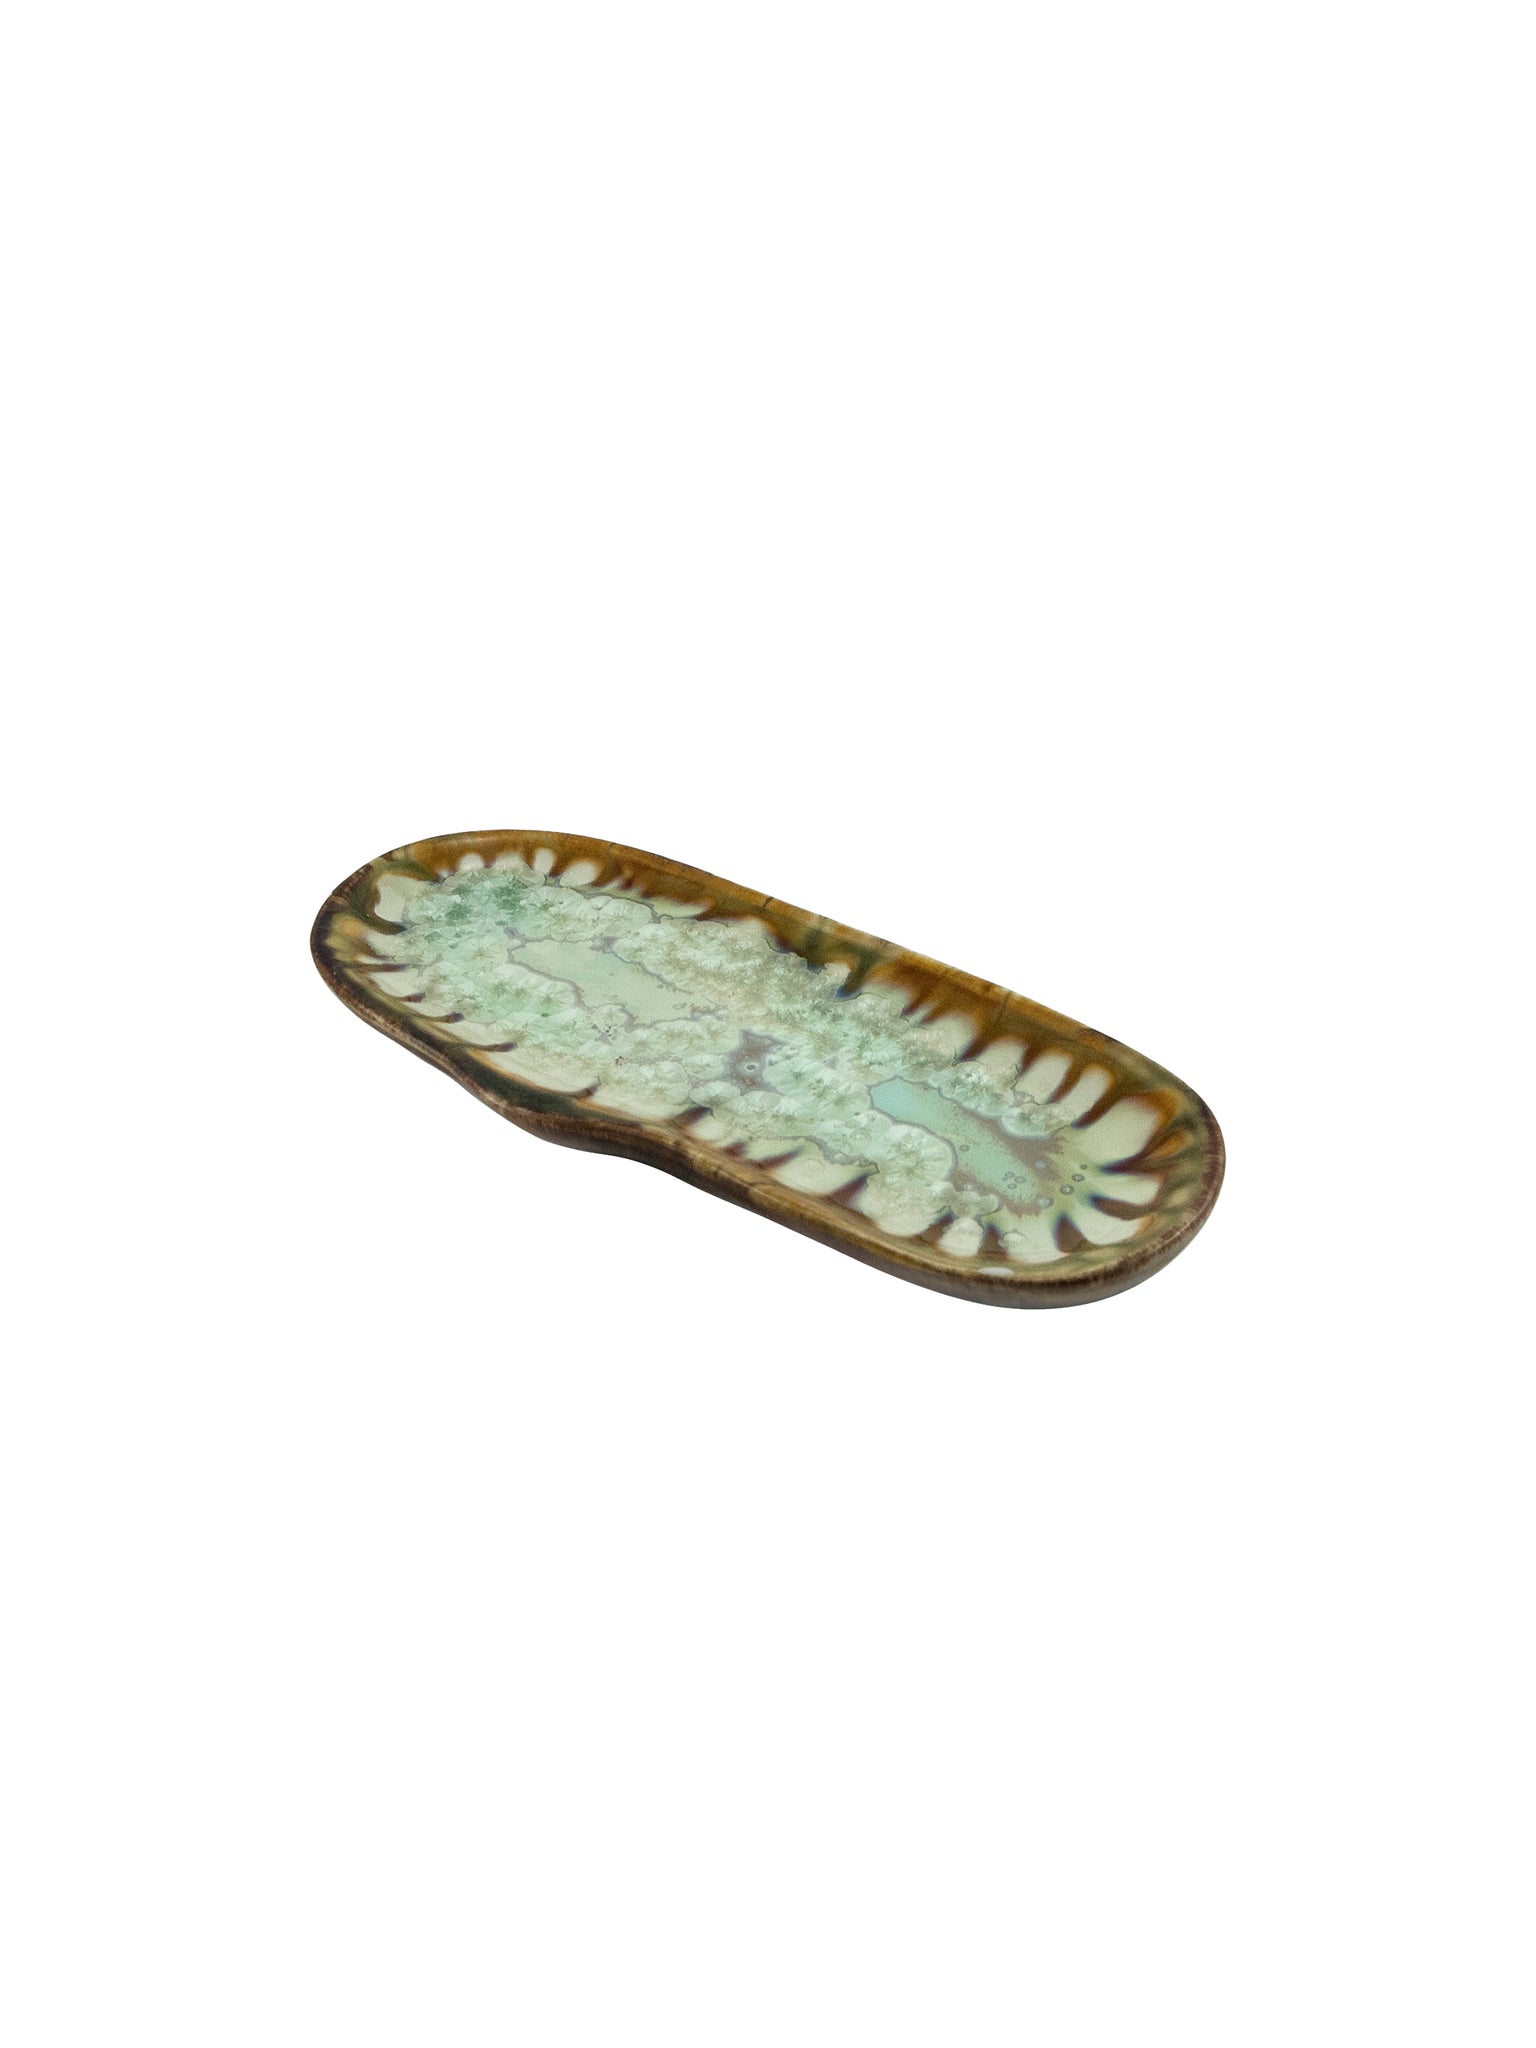 Mint and Tortoise Razor Clam Plates Small Weston Table